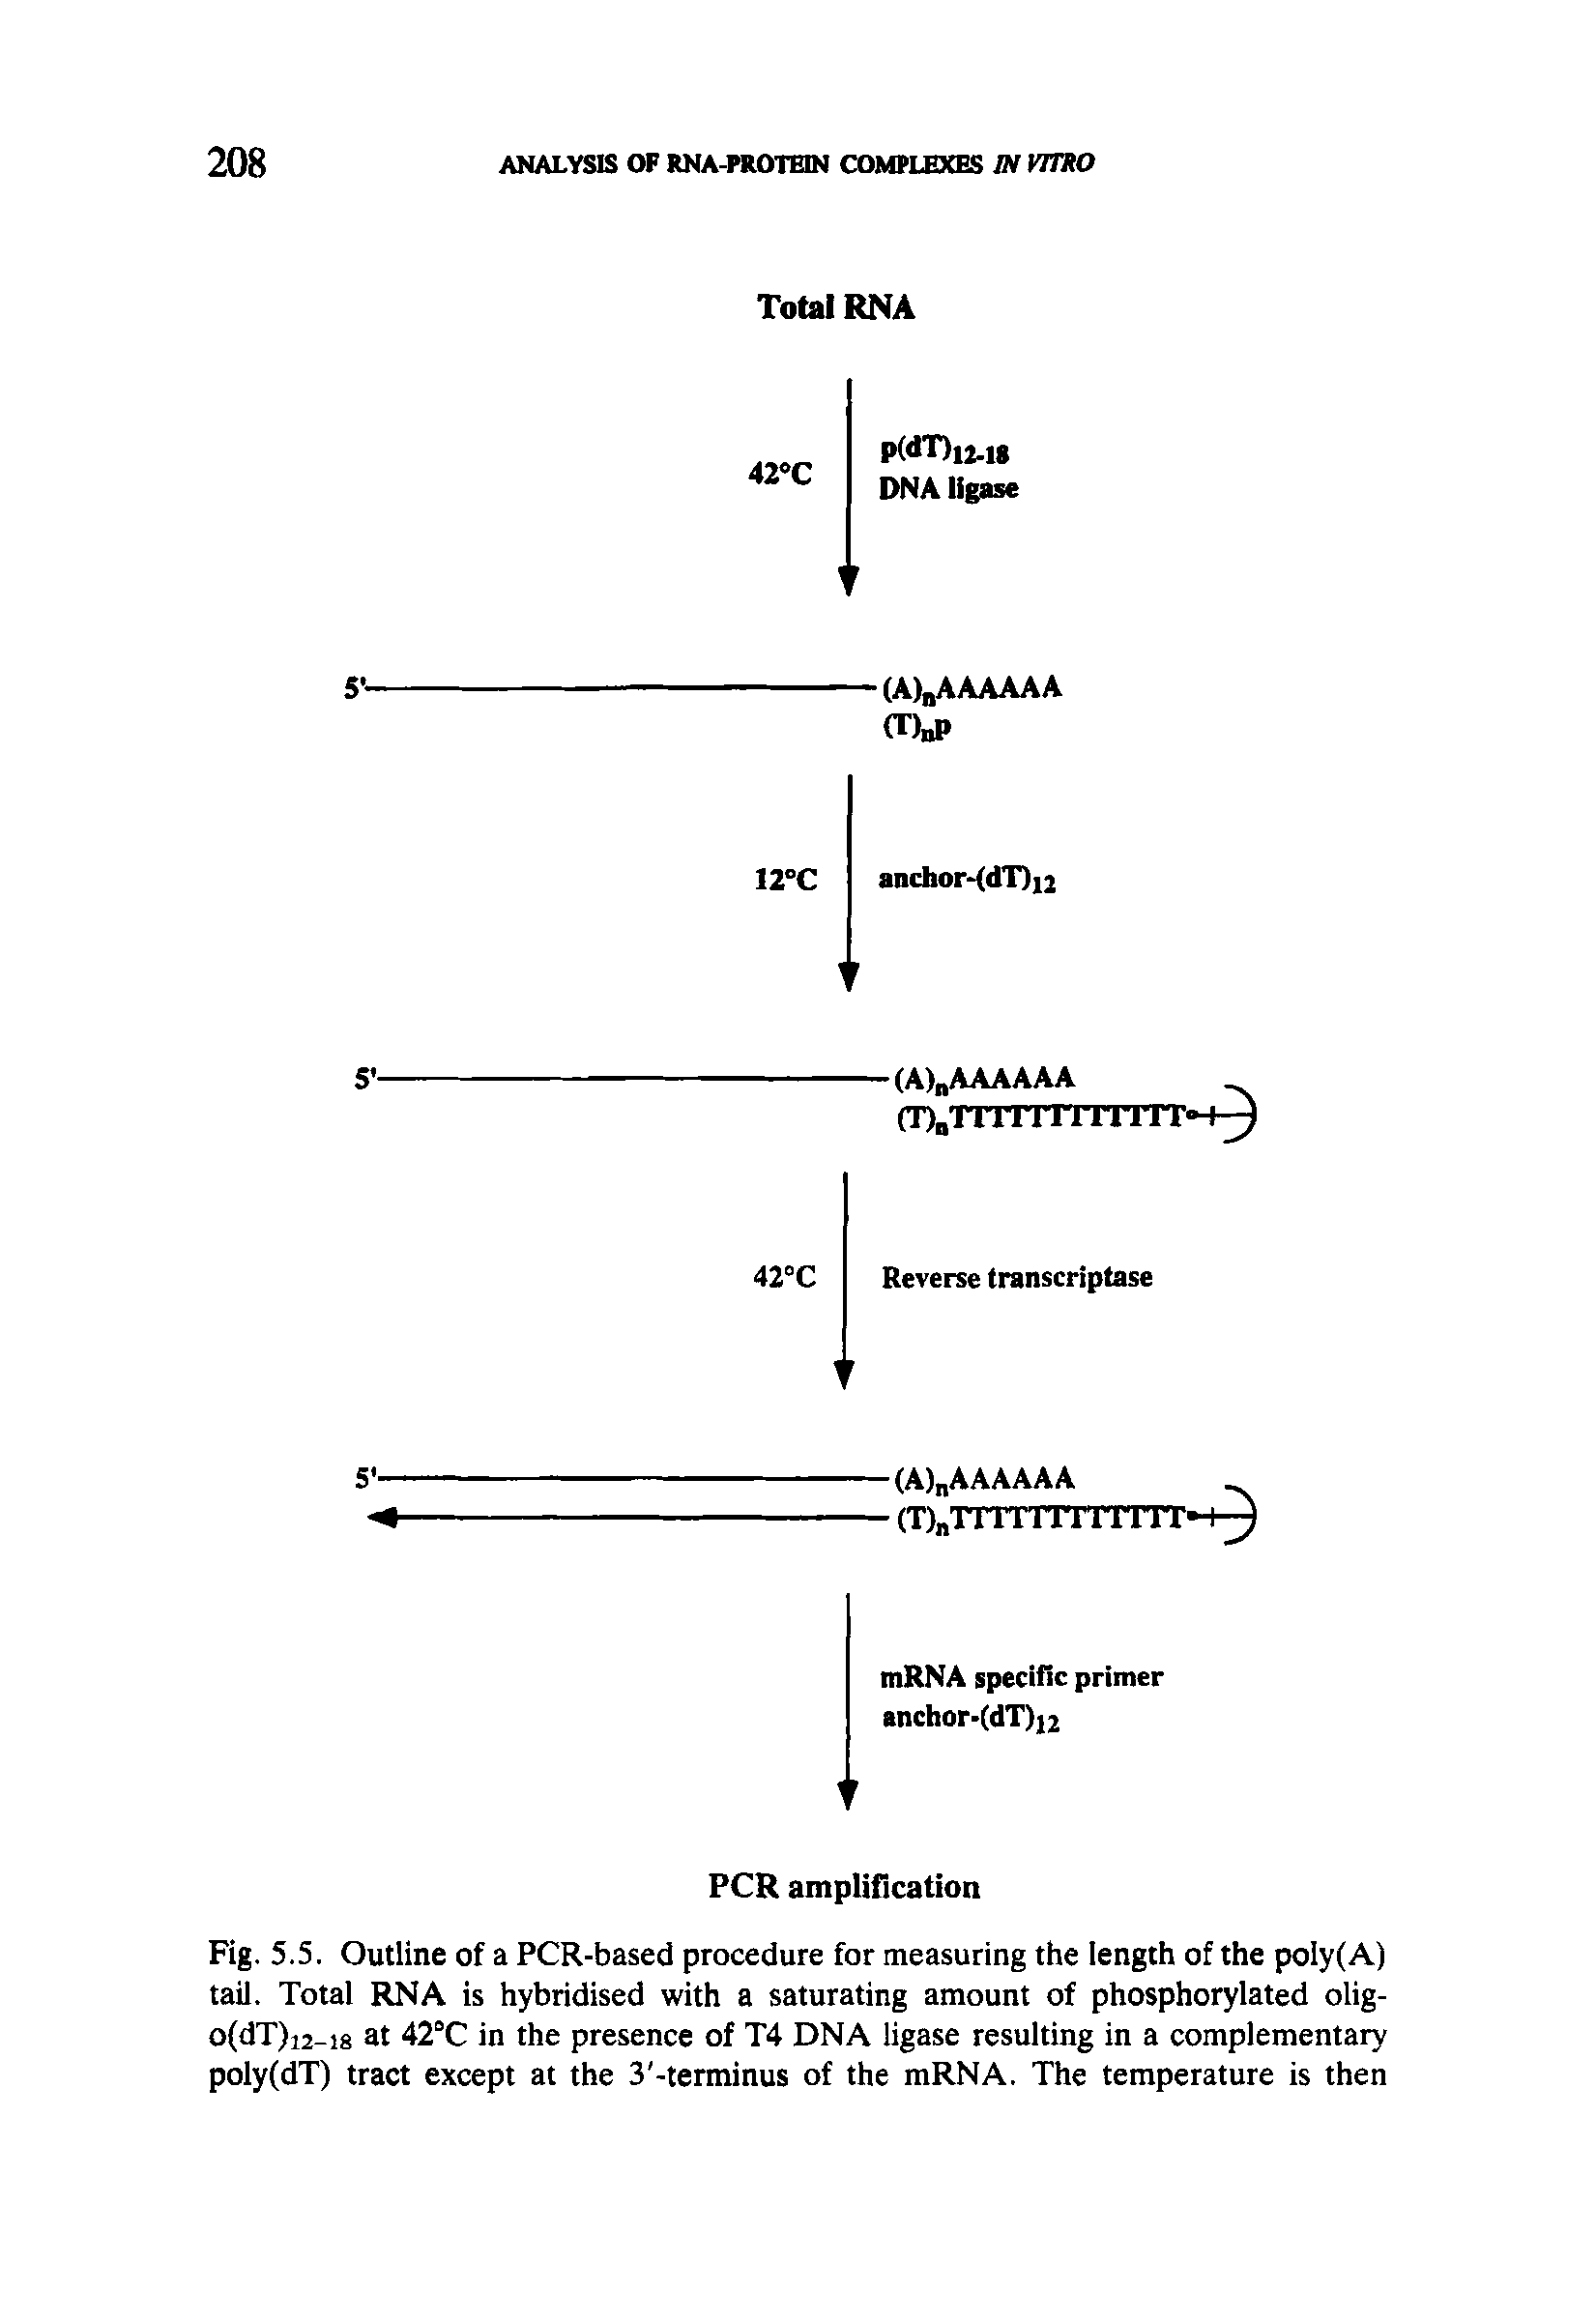 Fig. 5.5. Outline of a PCR-based procedure for measuring the length of the poIy(A) tail. Total RNA is hybridised with a saturating amount of phosphorylated olig-o(dT)i2-is at 42°C in the presence of T4 DNA ligase resulting in a complementary poly(dT) tract except at the 3 -terminus of the mRNA. The temperature is then...